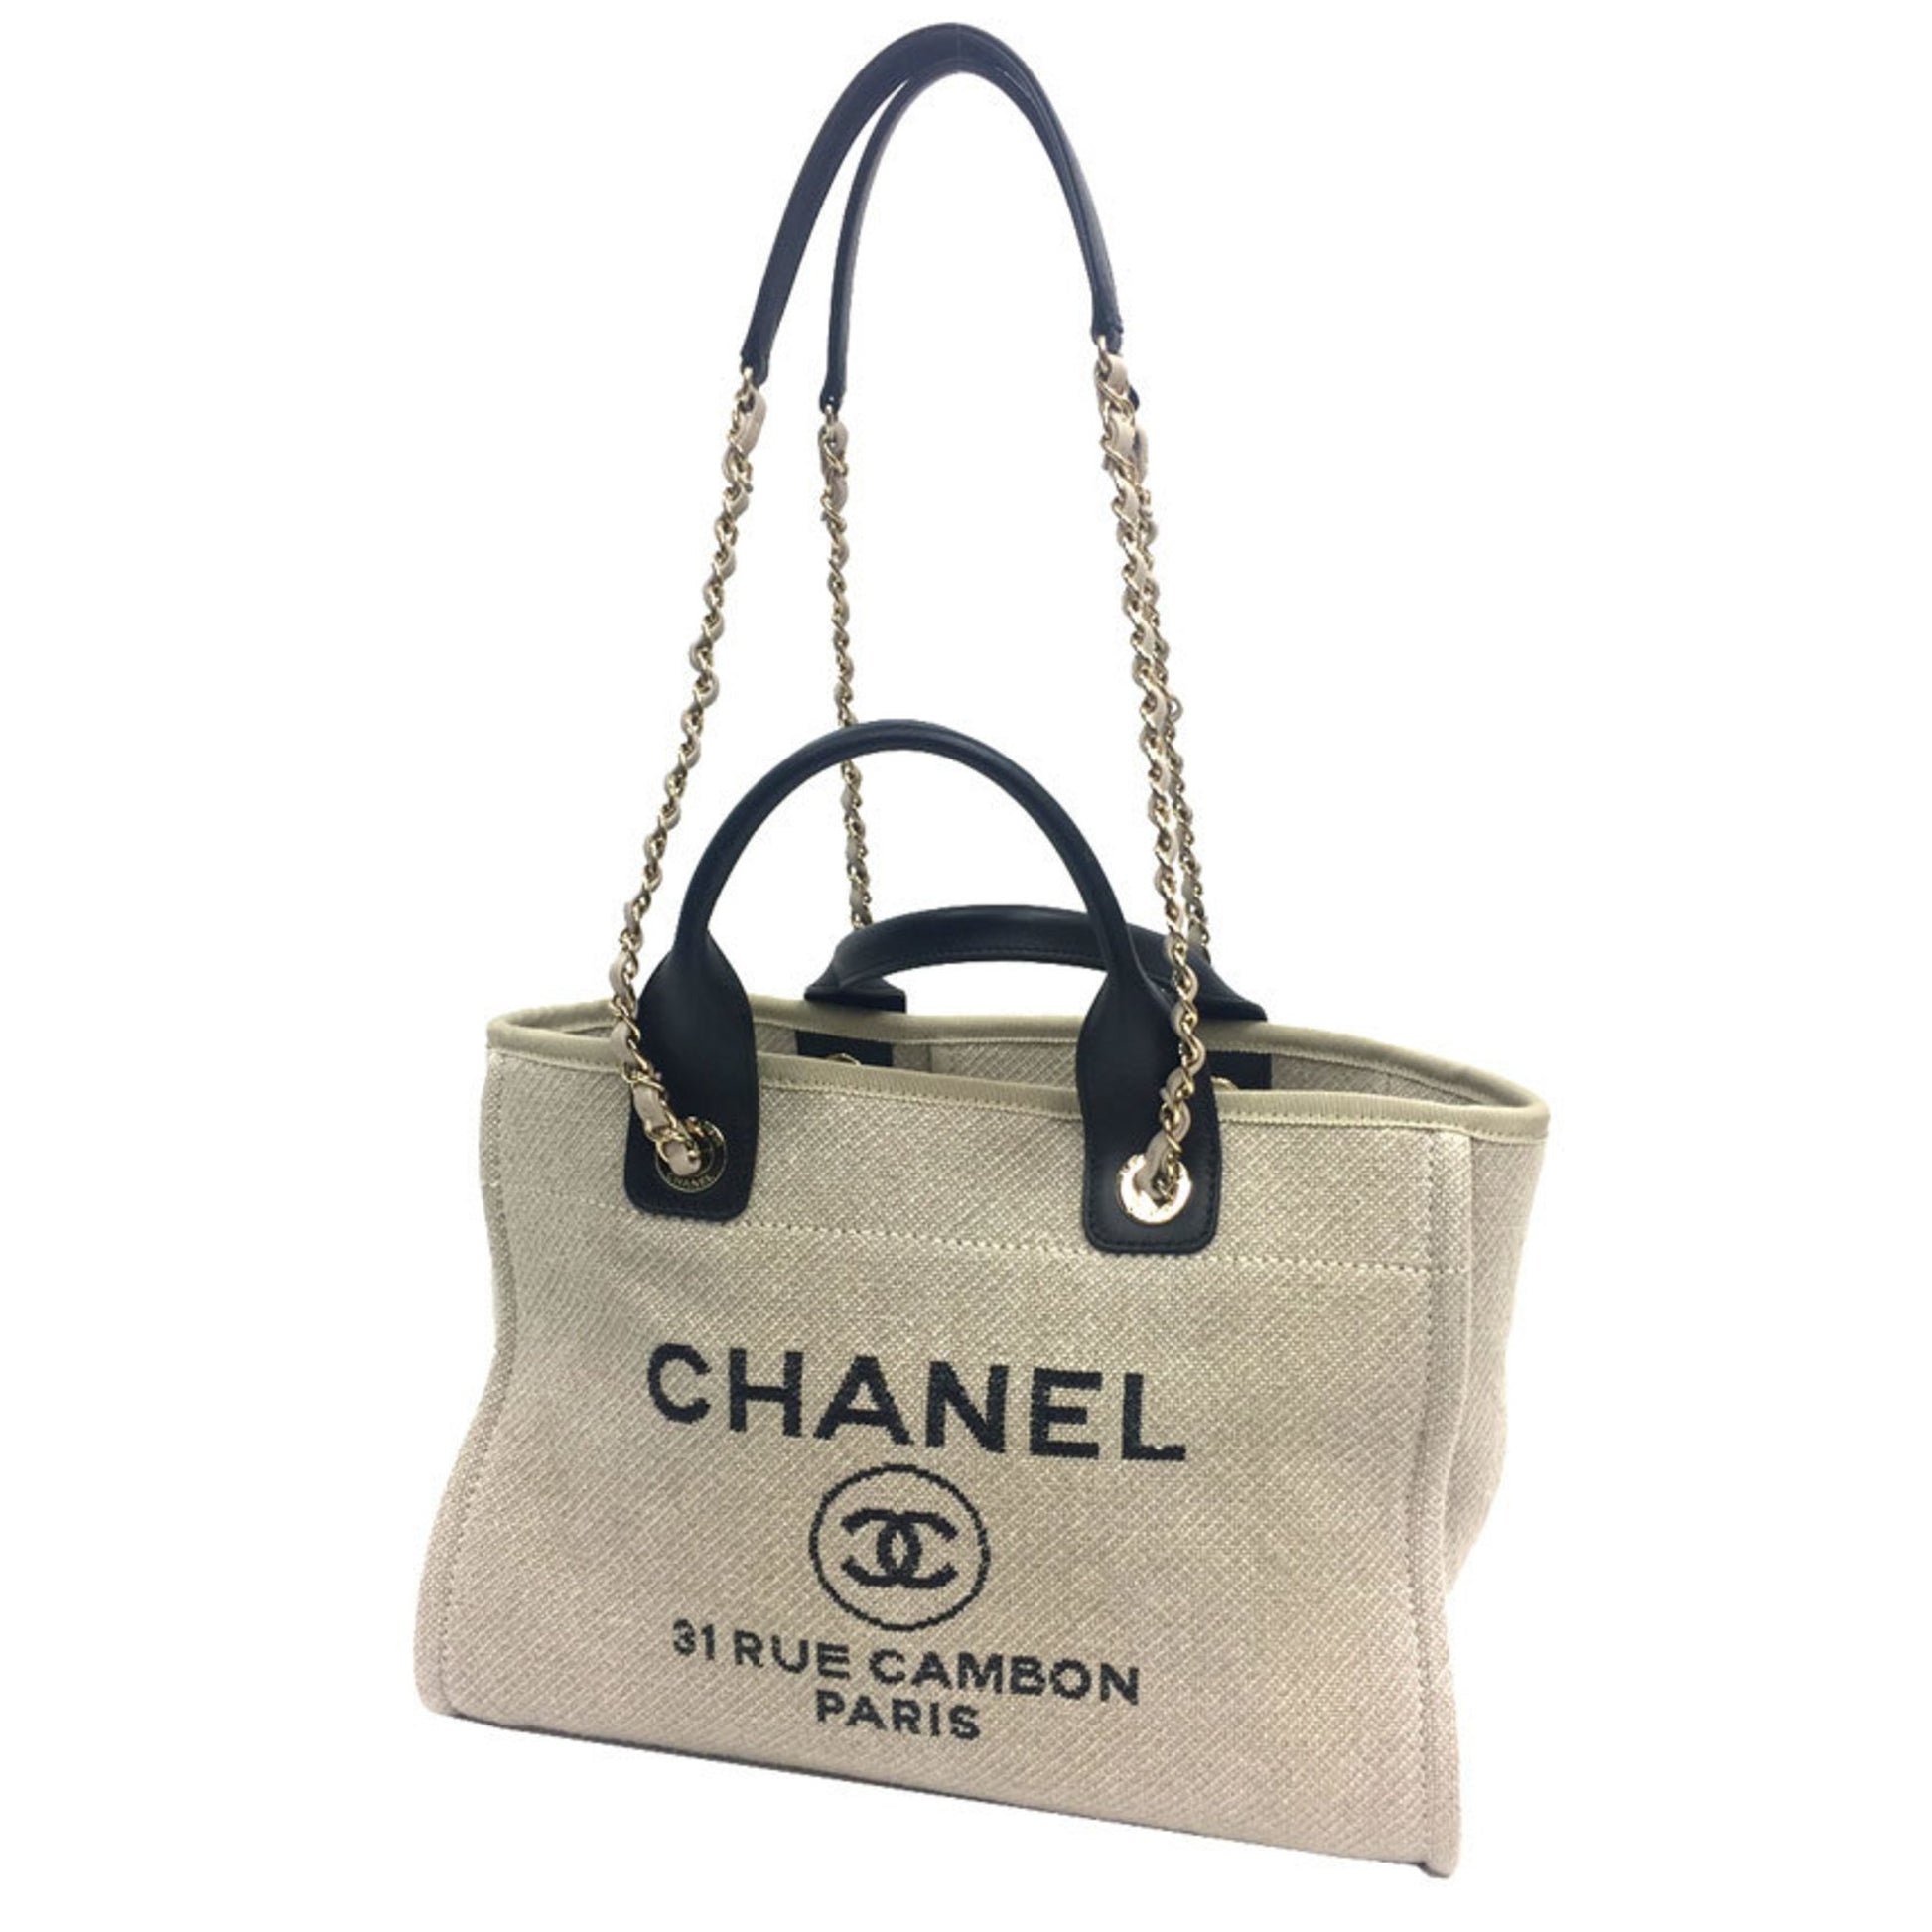 Chanel 22 Deauville bag ladies small AS3257 B08029 NI018 tote